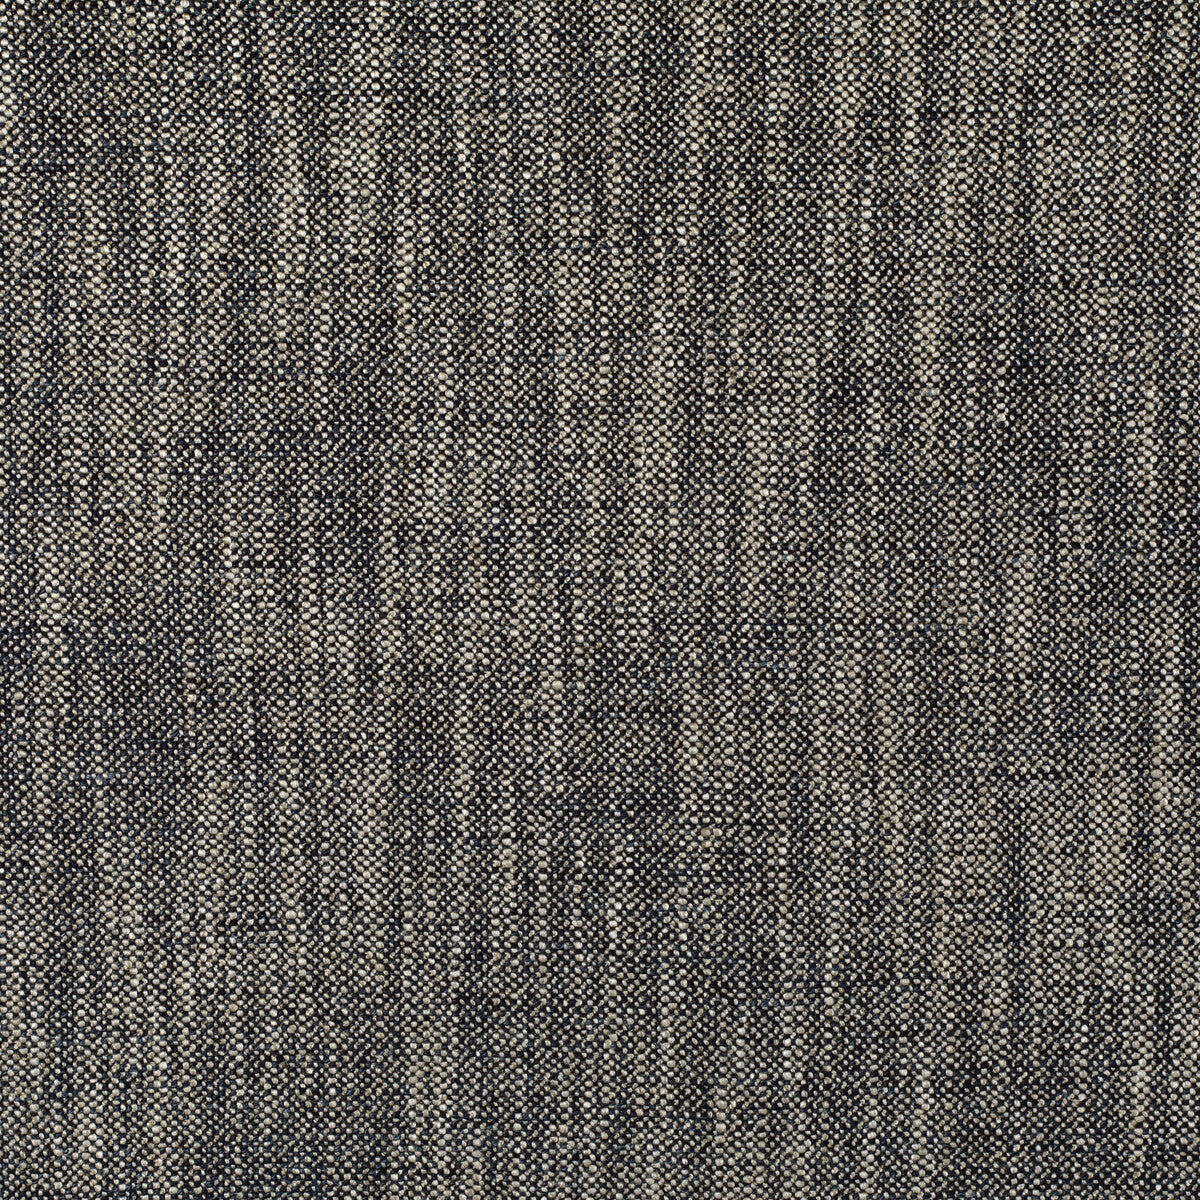 Kravet Couture fabric in 35872 color - pattern 35872.511.0 - by Kravet Couture